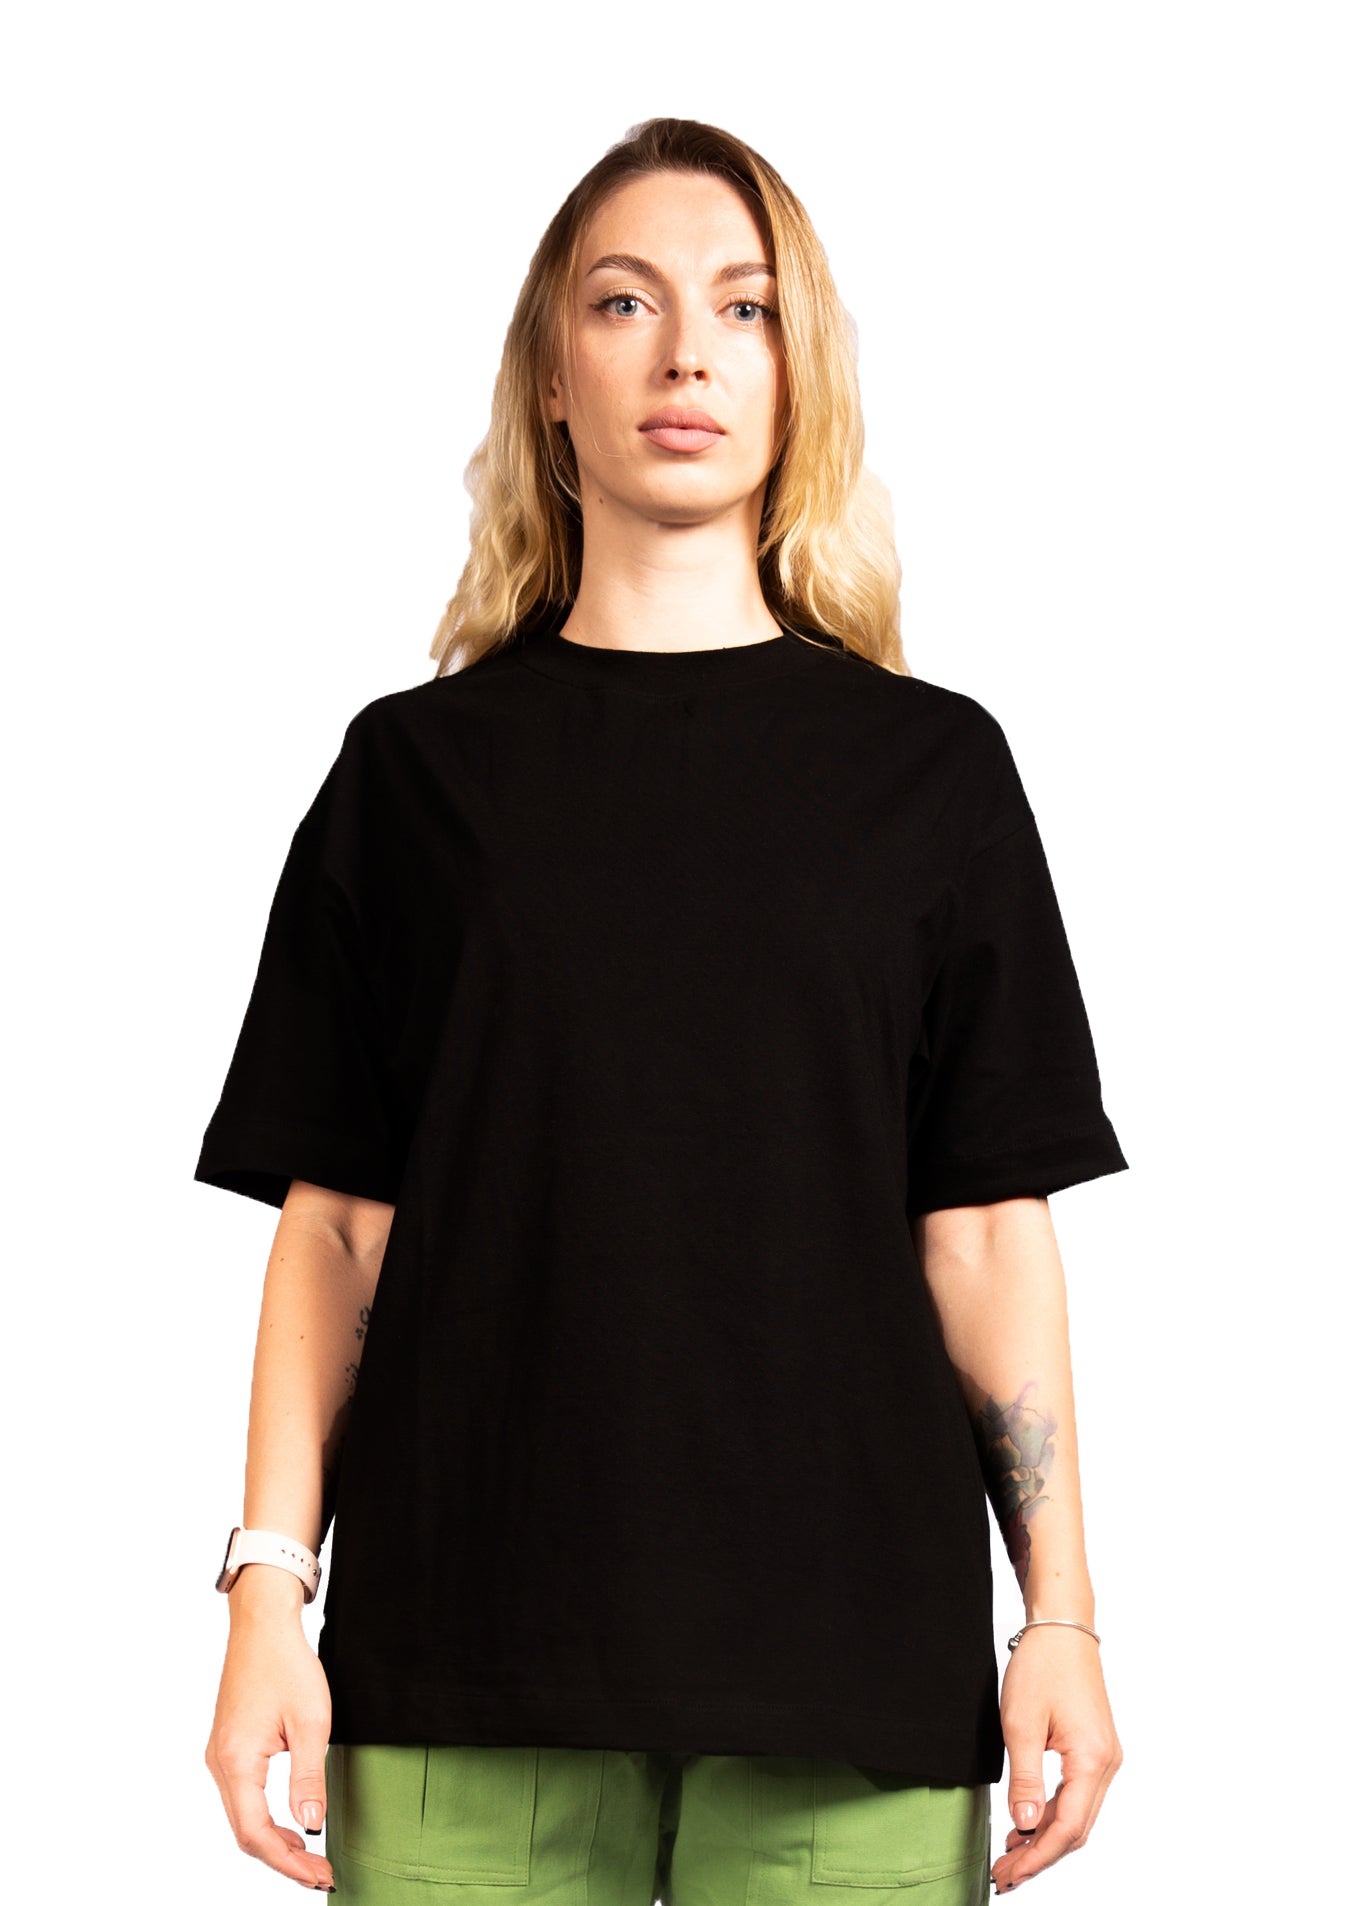 Signature Face Oversized printed Black T-shirt for her .